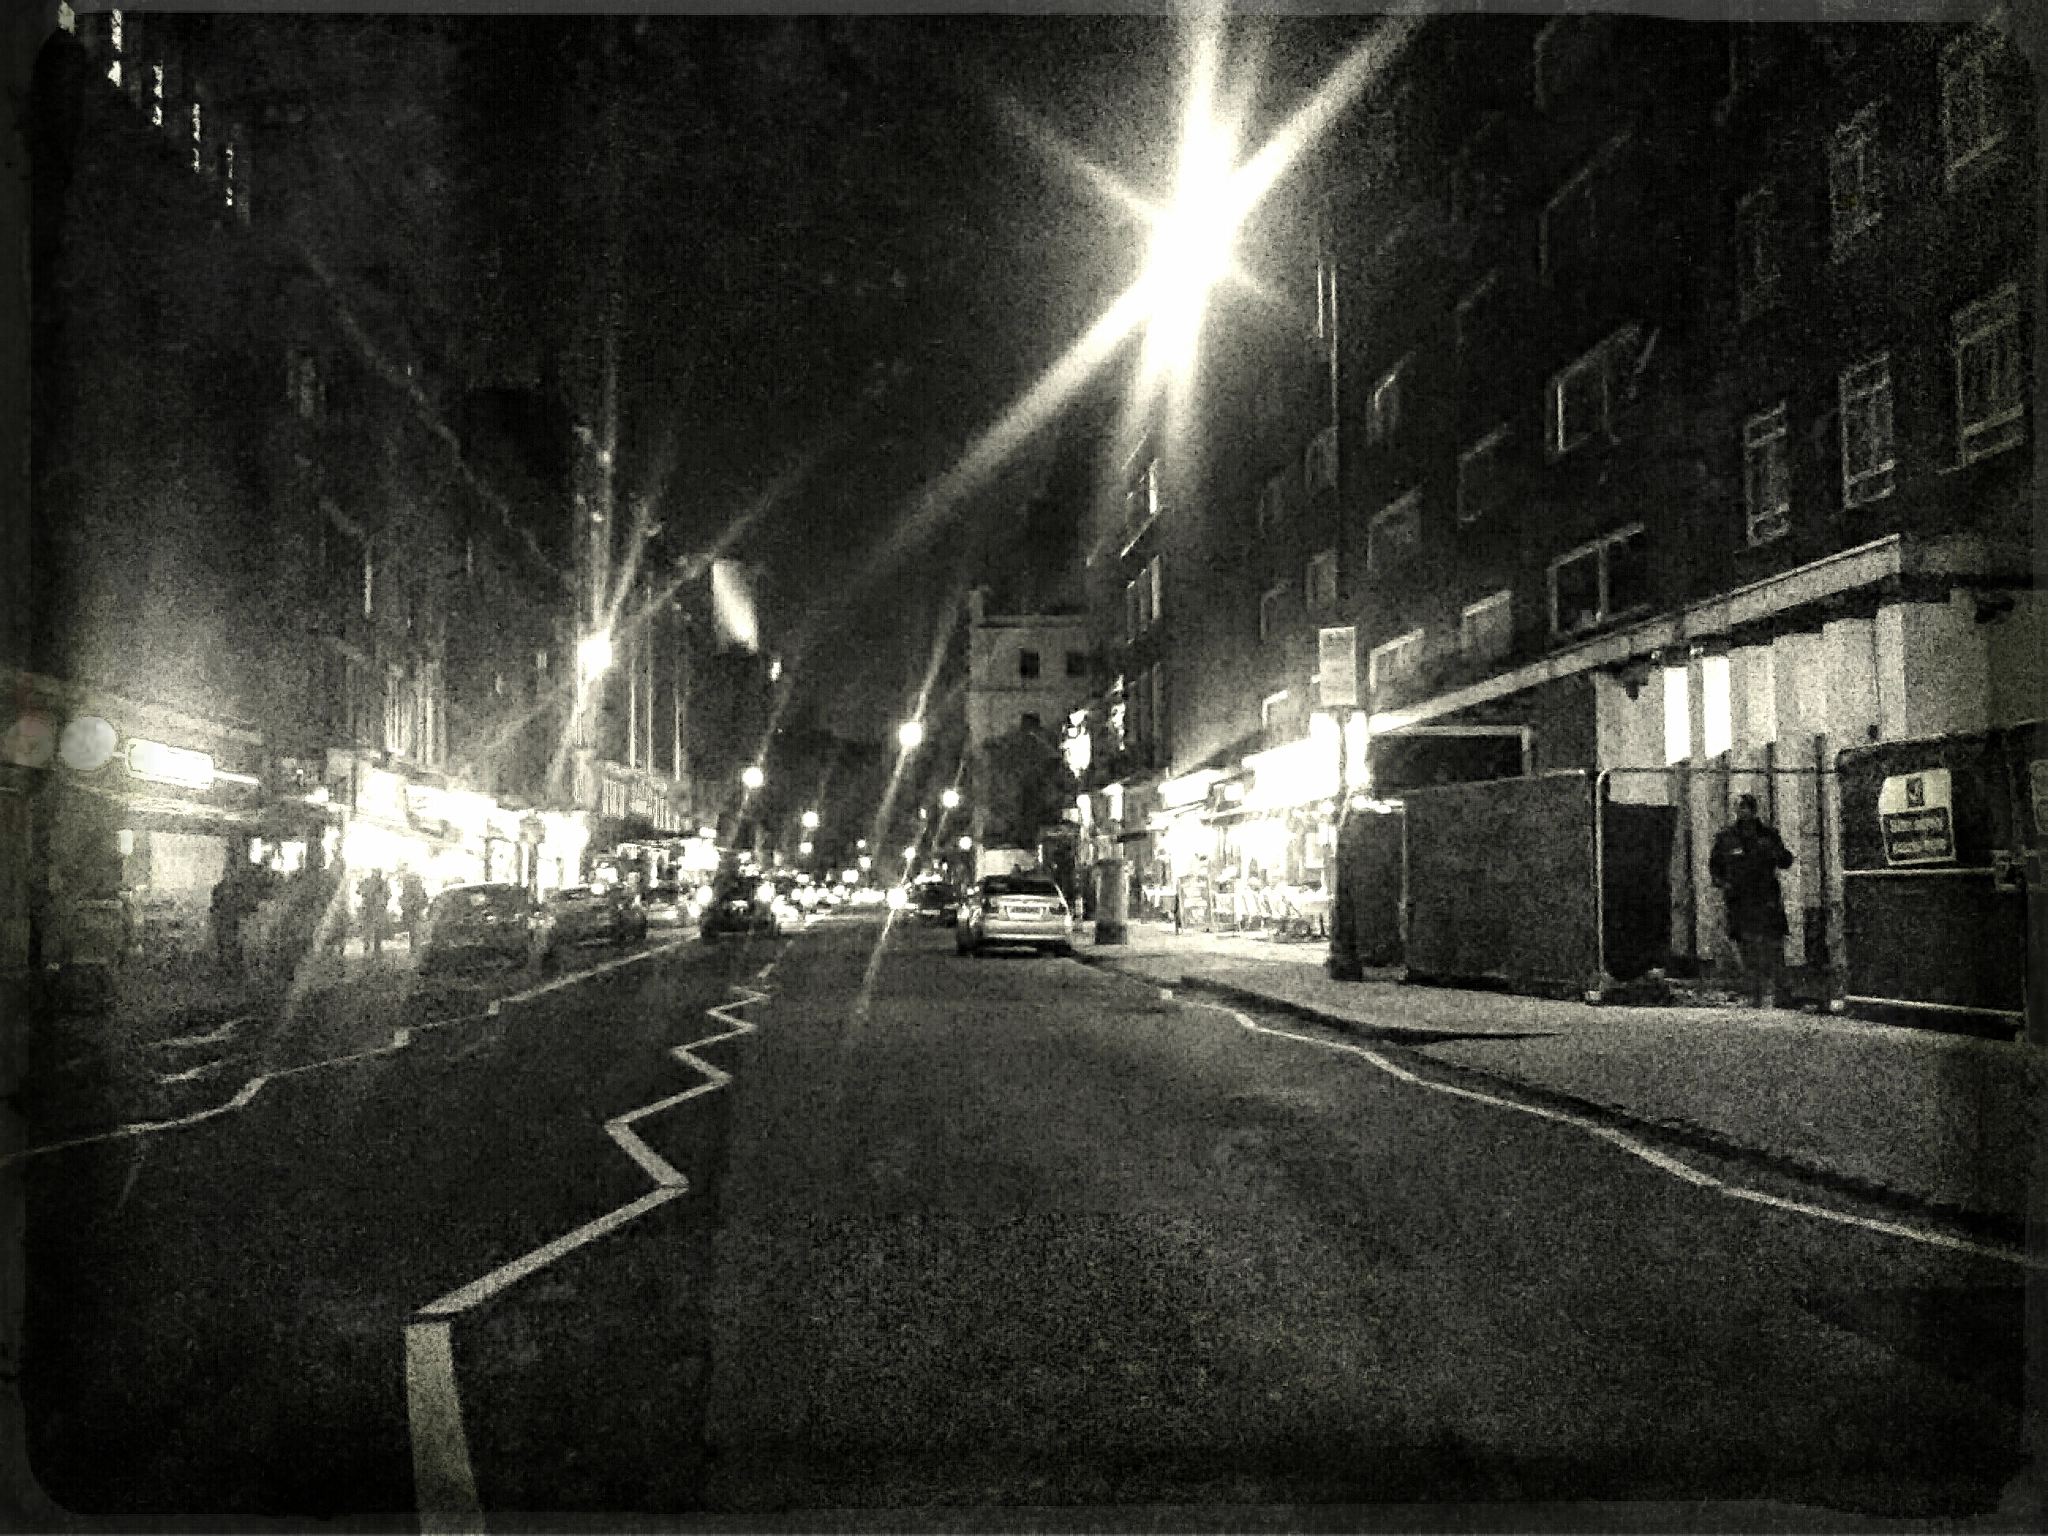 HUAWEI Y560-L01 sample photo. Londoner's night tale photography